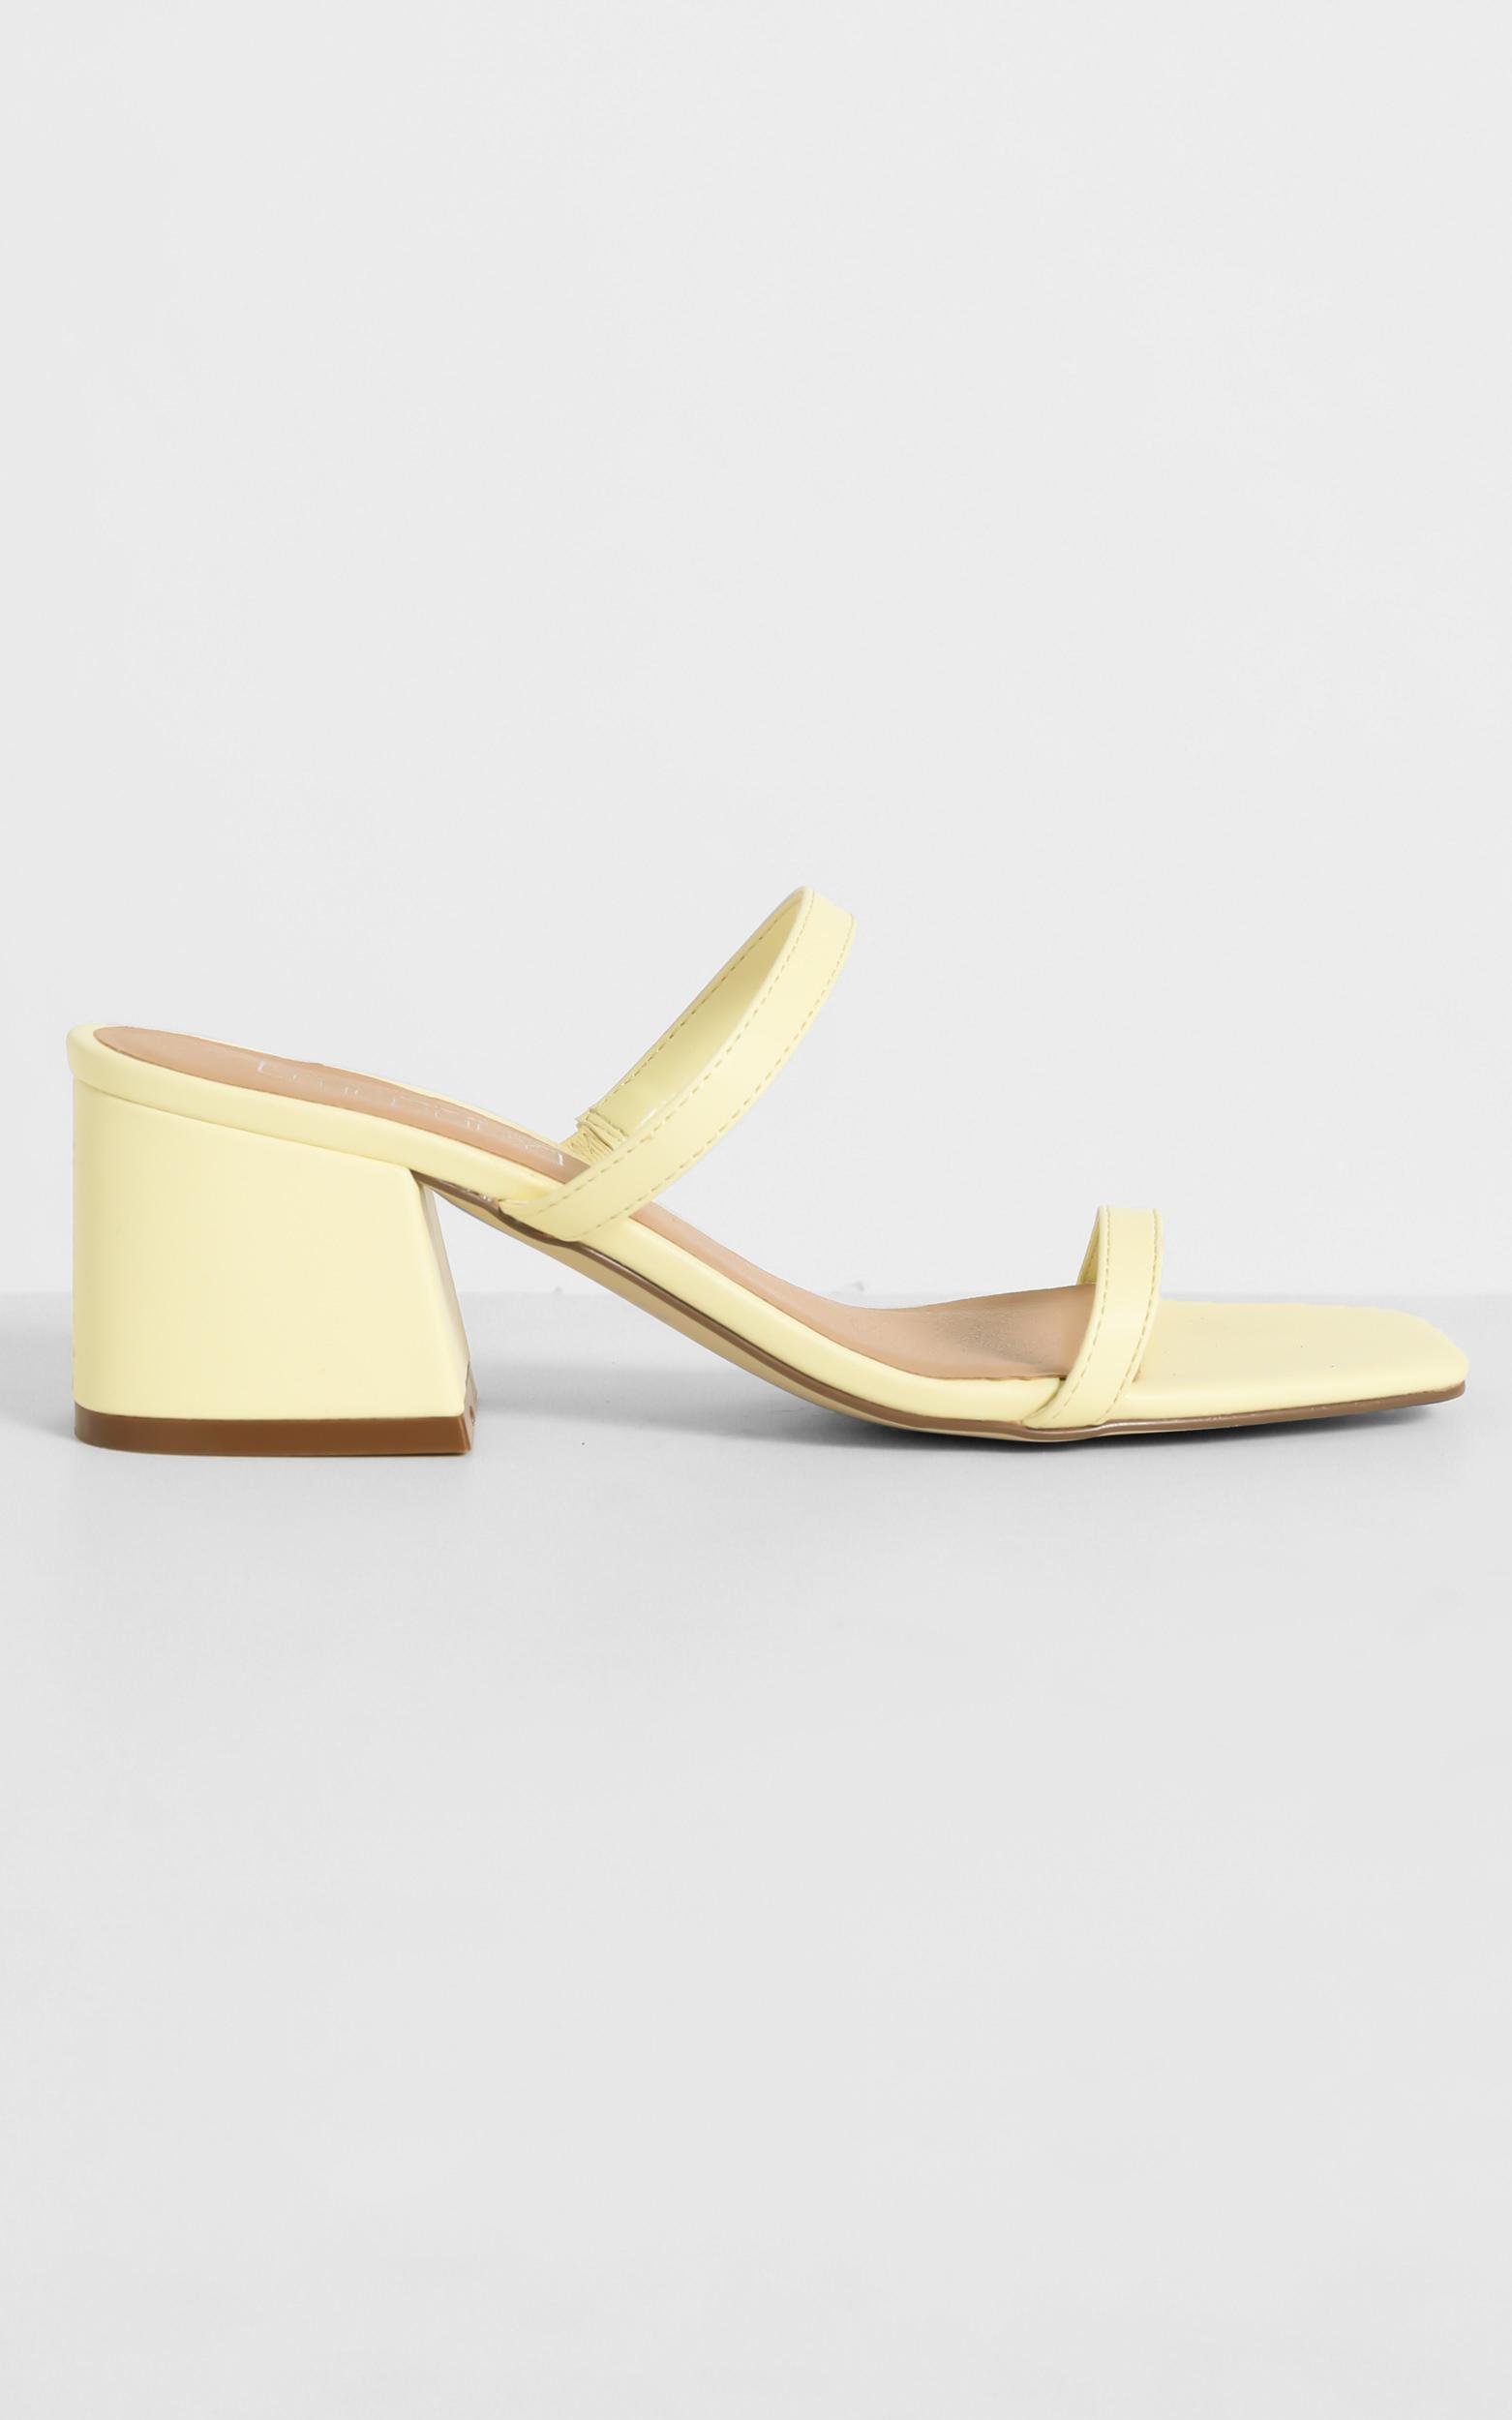 Therapy - Goldie Heels in Pastel Yellow - 5, YEL4, hi-res image number null